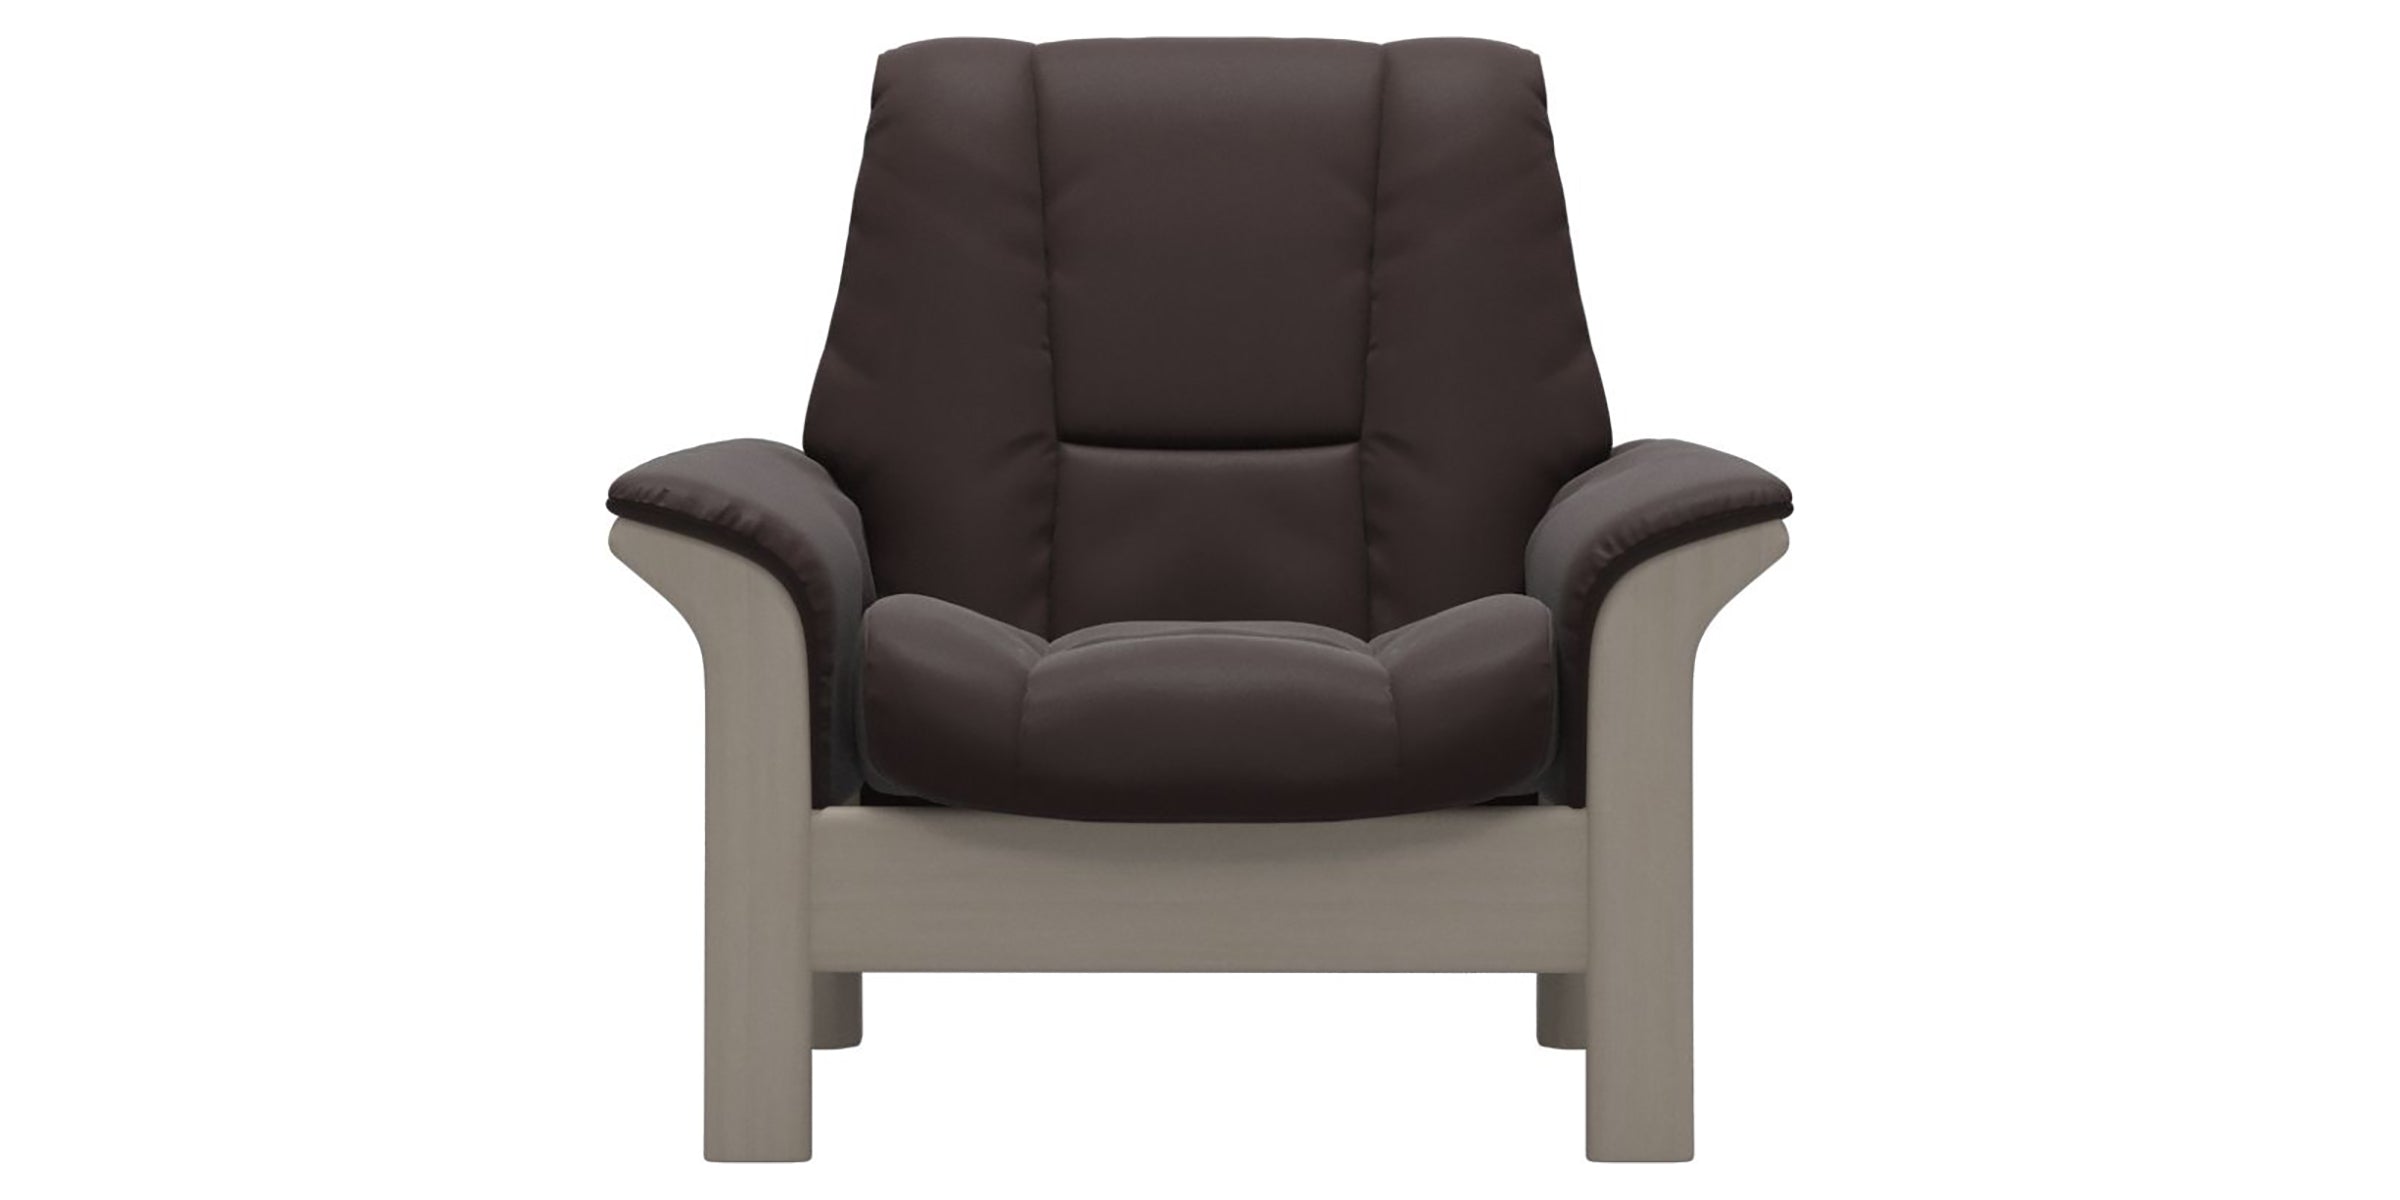 Paloma Leather Chocolate and Whitewash Base | Stressless Windsor Low Back Chair | Valley Ridge Furniture